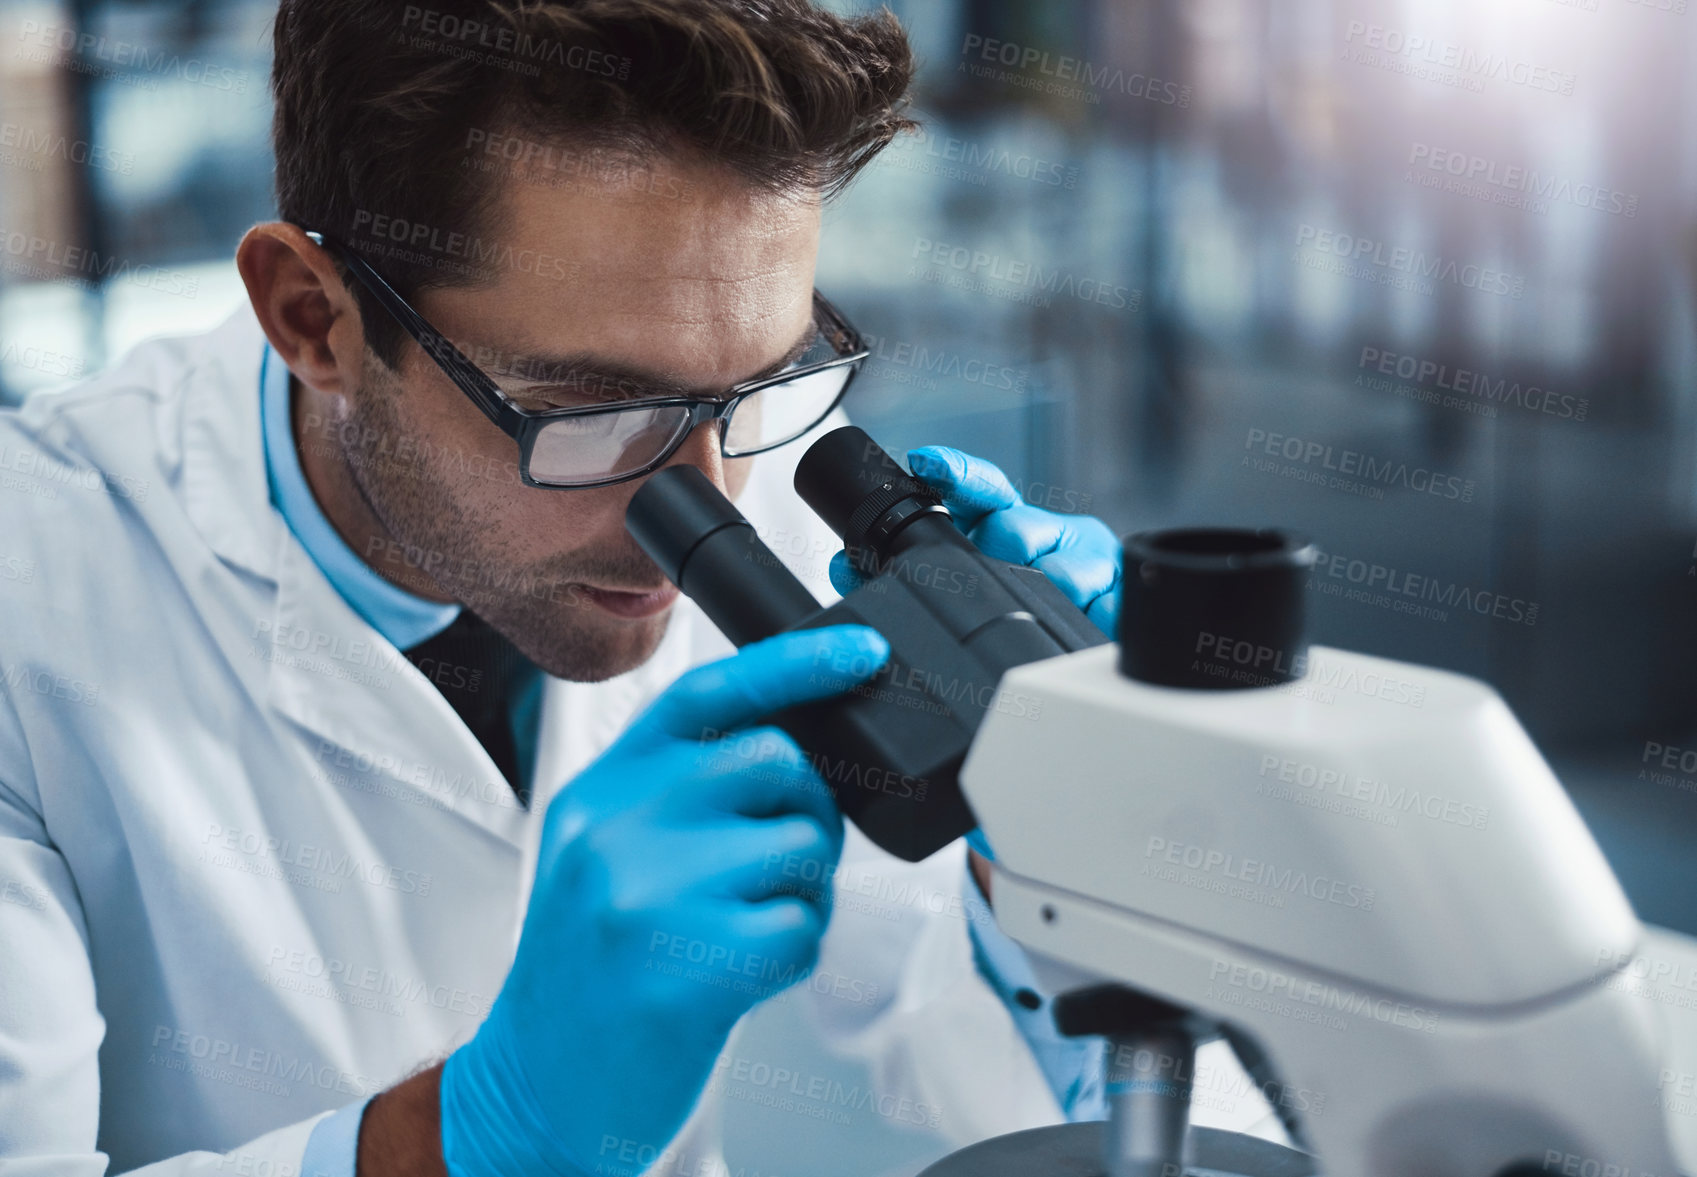 Buy stock photo Cropped shot of a young male scientist working in a lab with a microscope